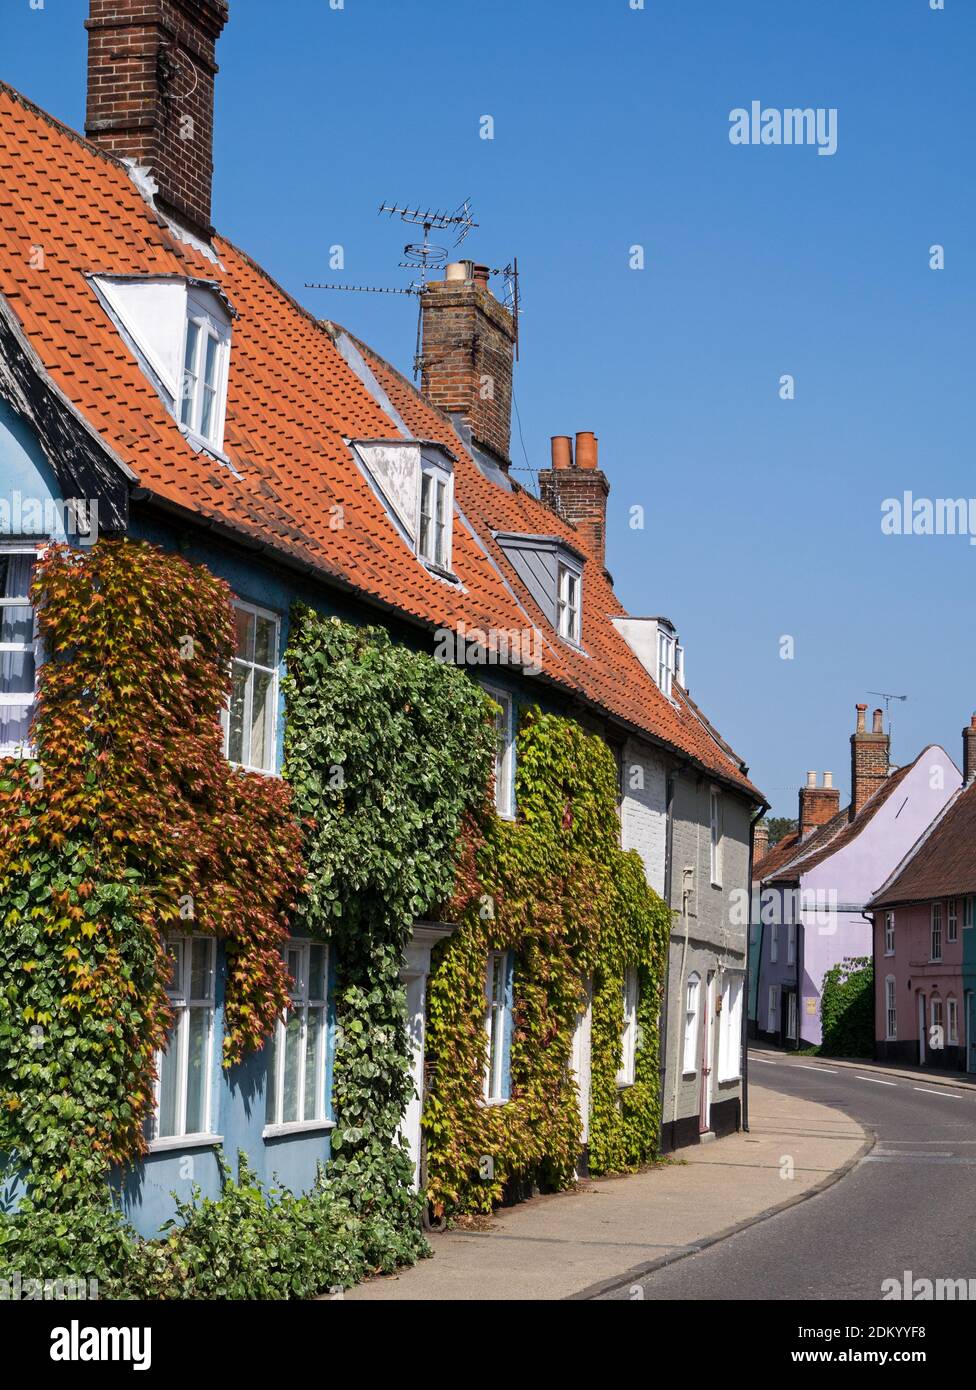 Picturesque Street of Period and Colourful Heritage Properties, in the Market Town of Bungay, Suffolk, England, UK Stock Photo